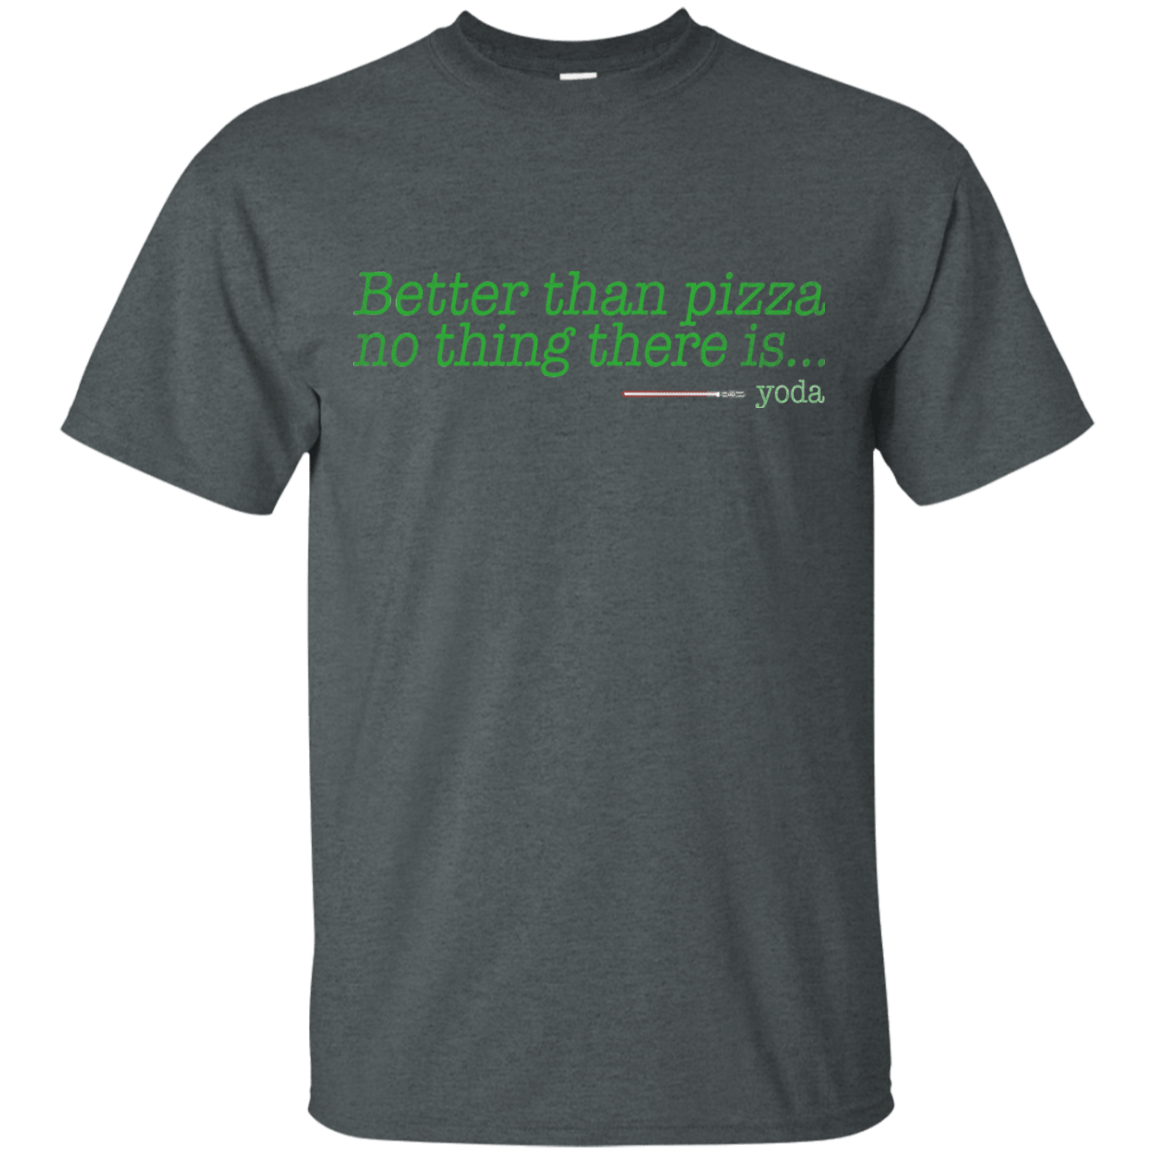 T-Shirts Dark Heather / S Eat pizza, You must T-Shirt